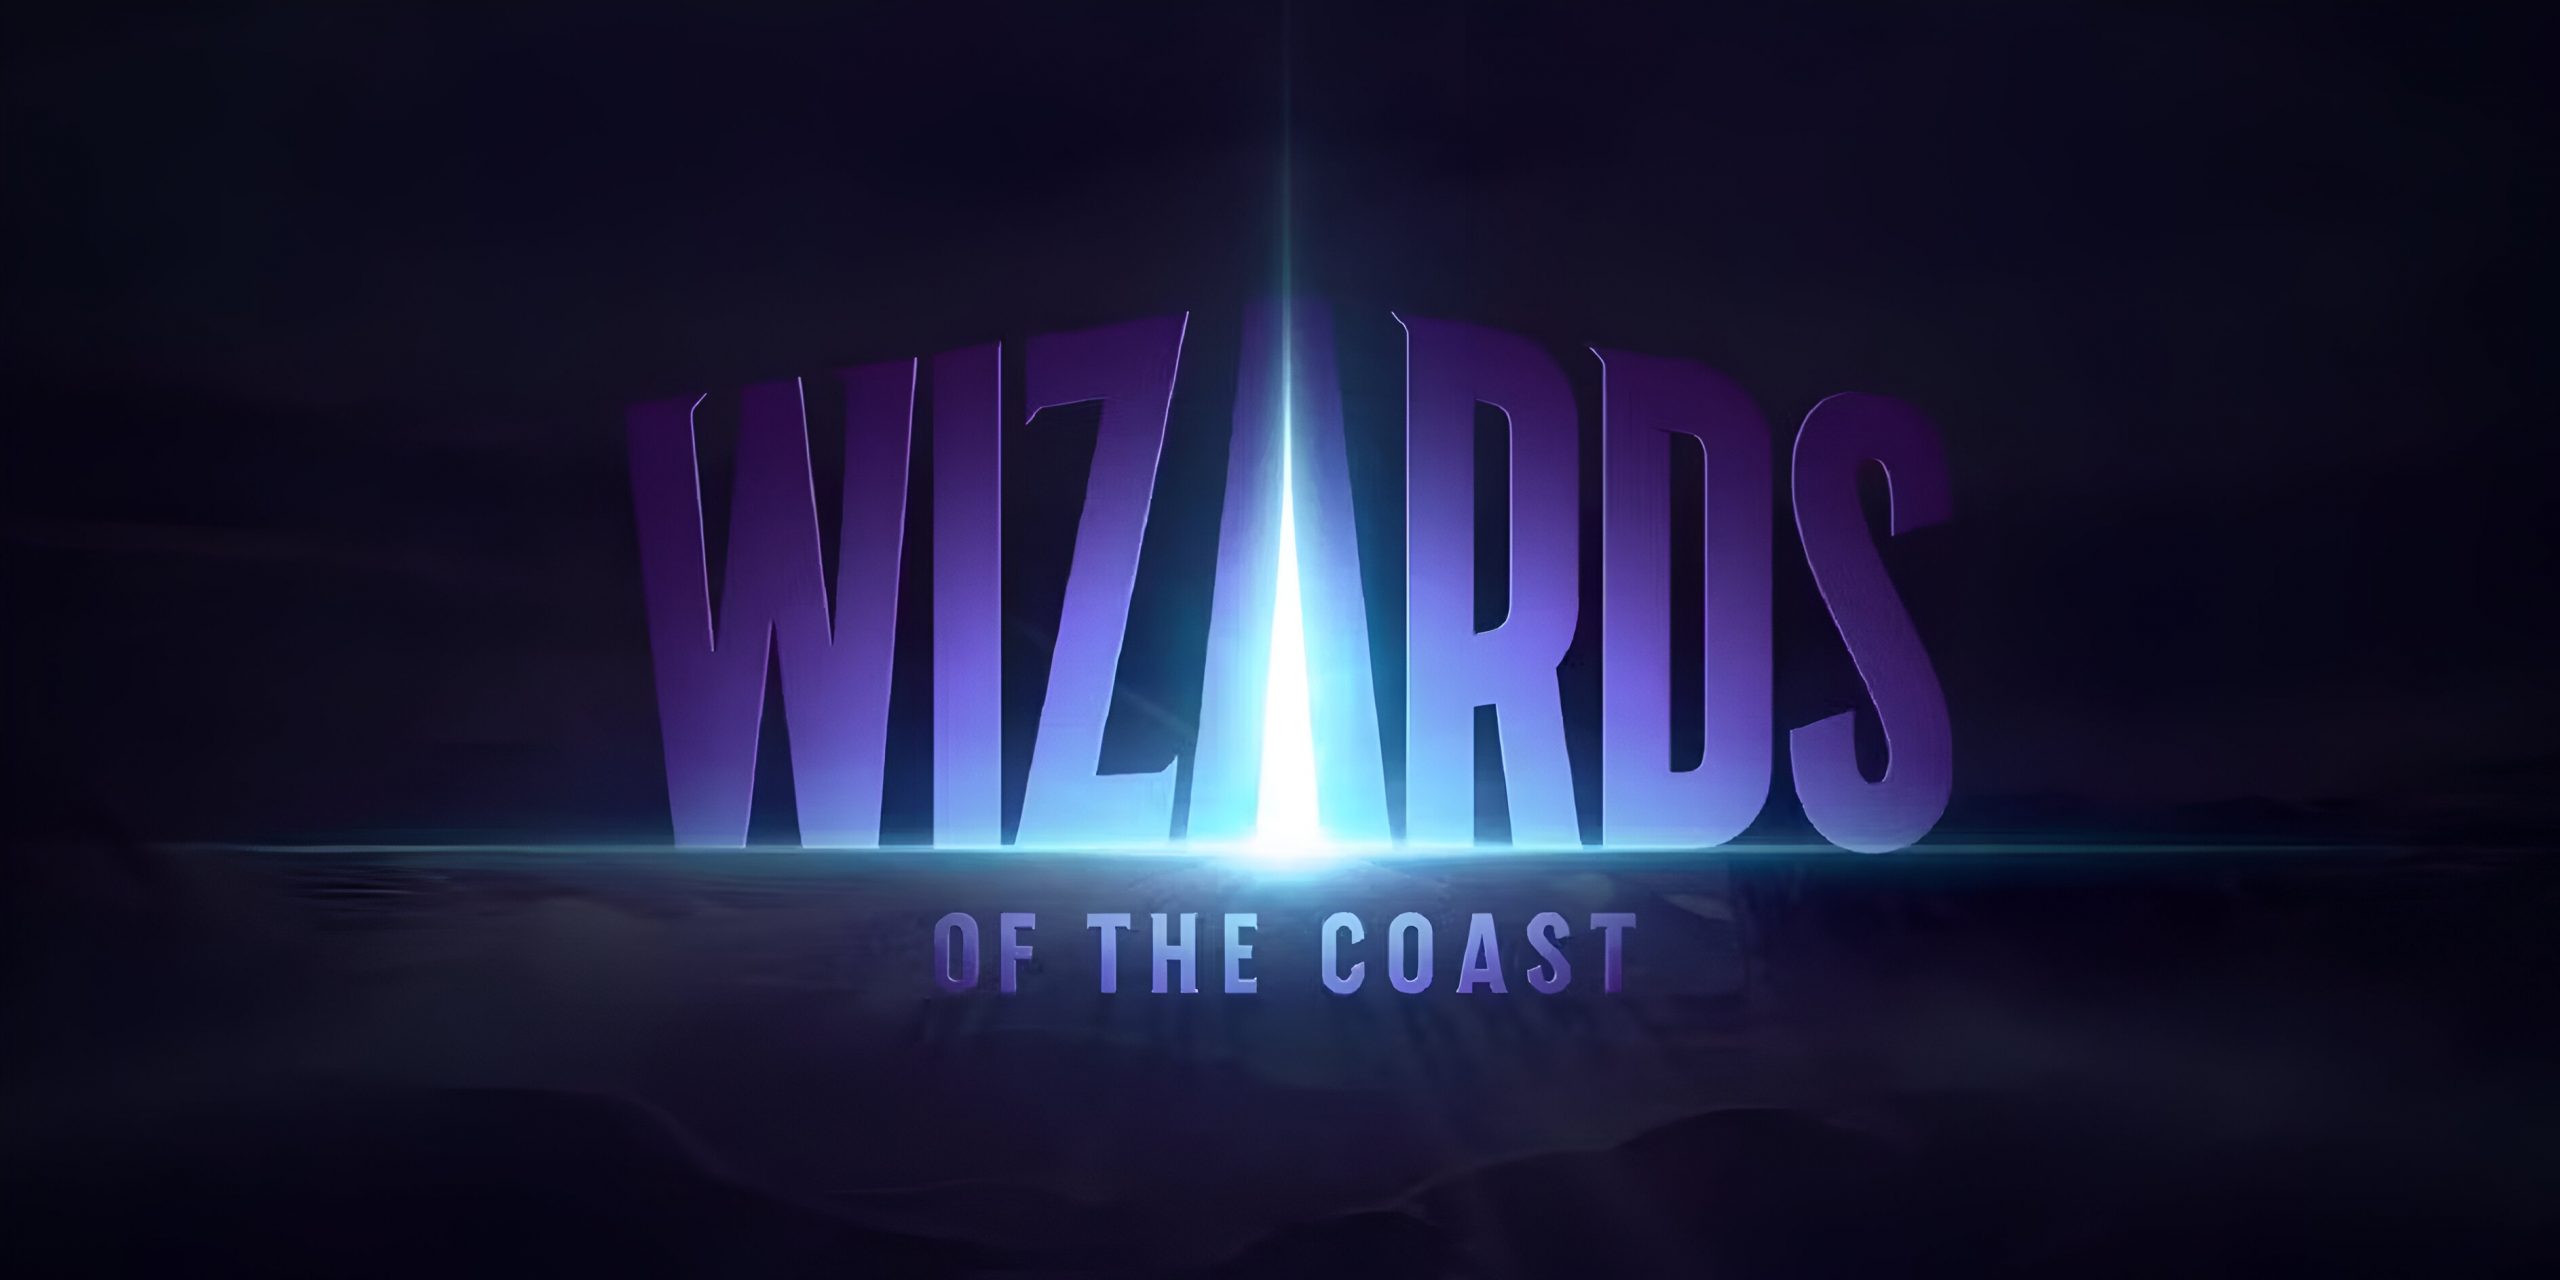 Wizards of the Coast giải quyết những lo ngại về AI